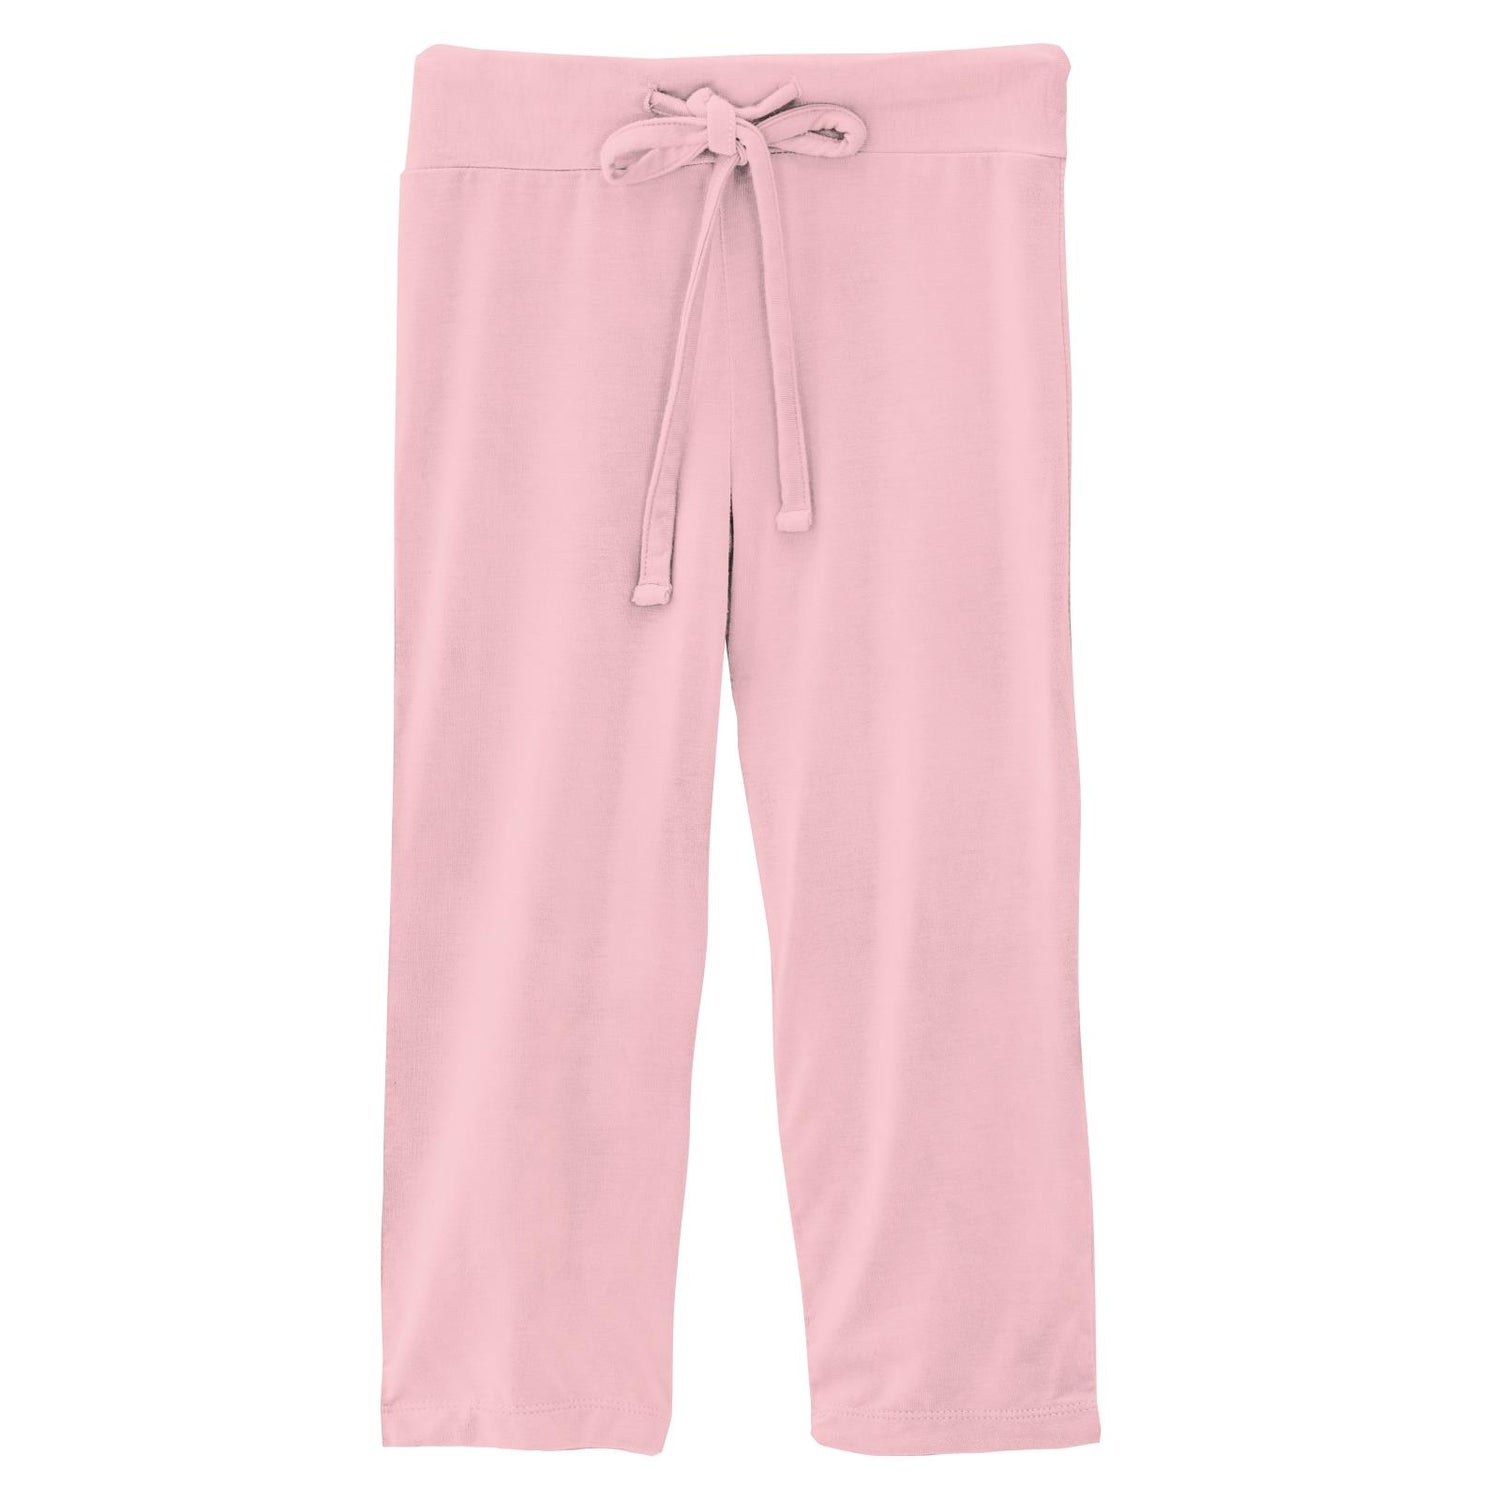 Relaxed Pants in Lotus